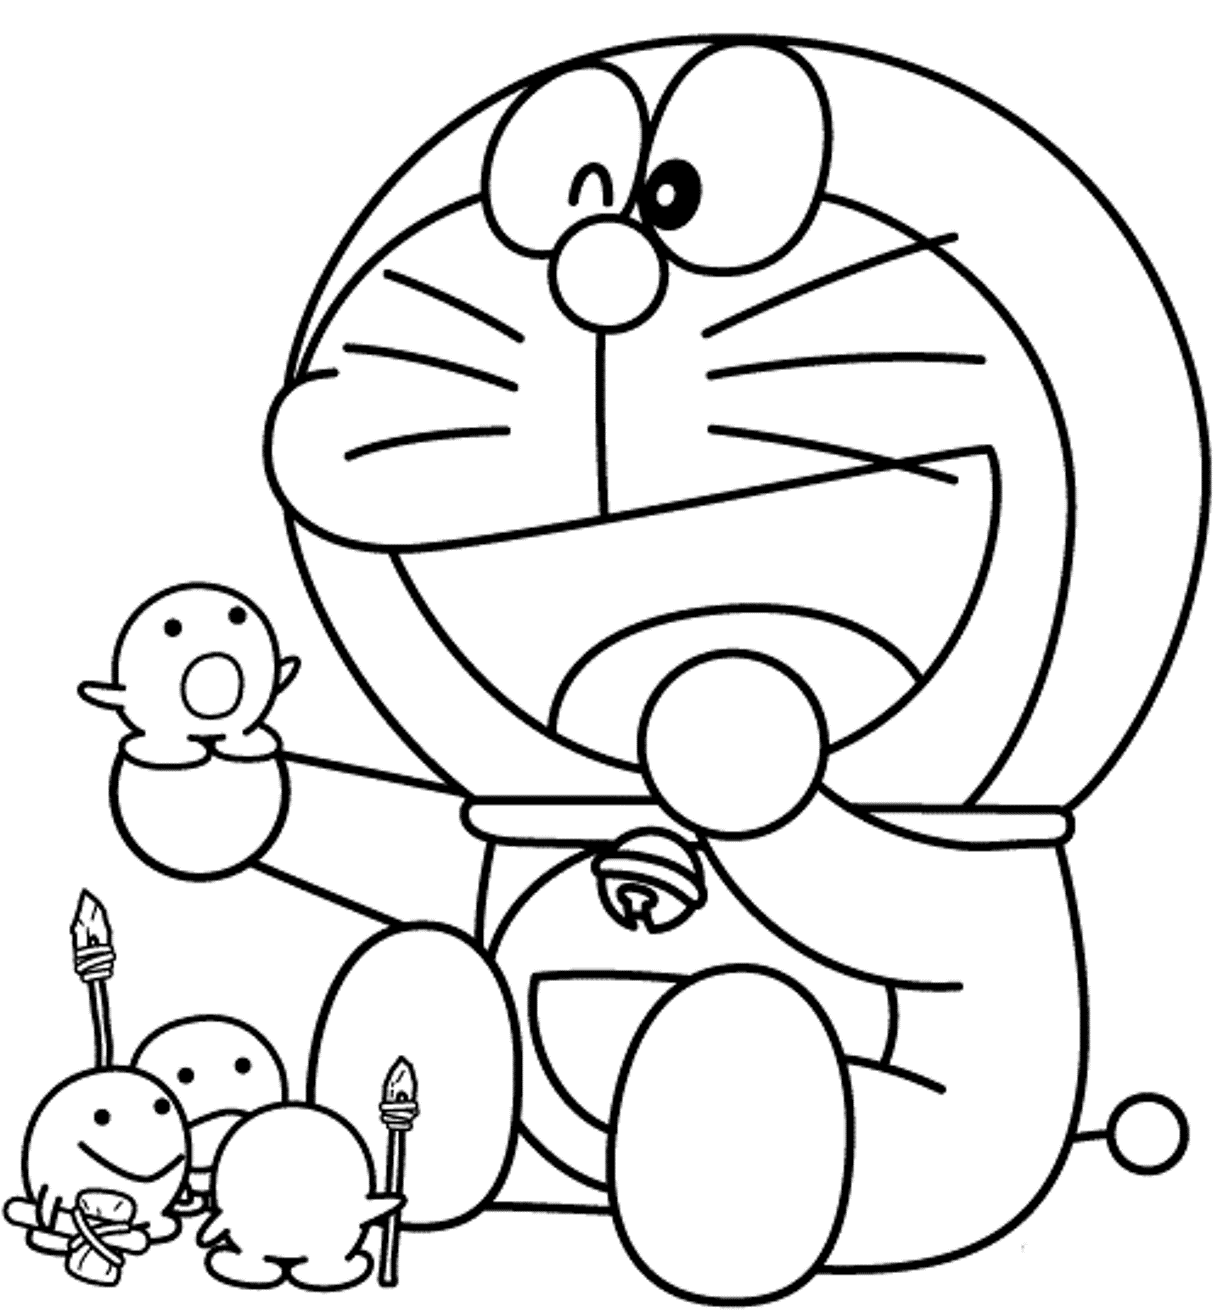 17+ Doraemon Cartoon Coloring Pages for Adults - Super Coloring